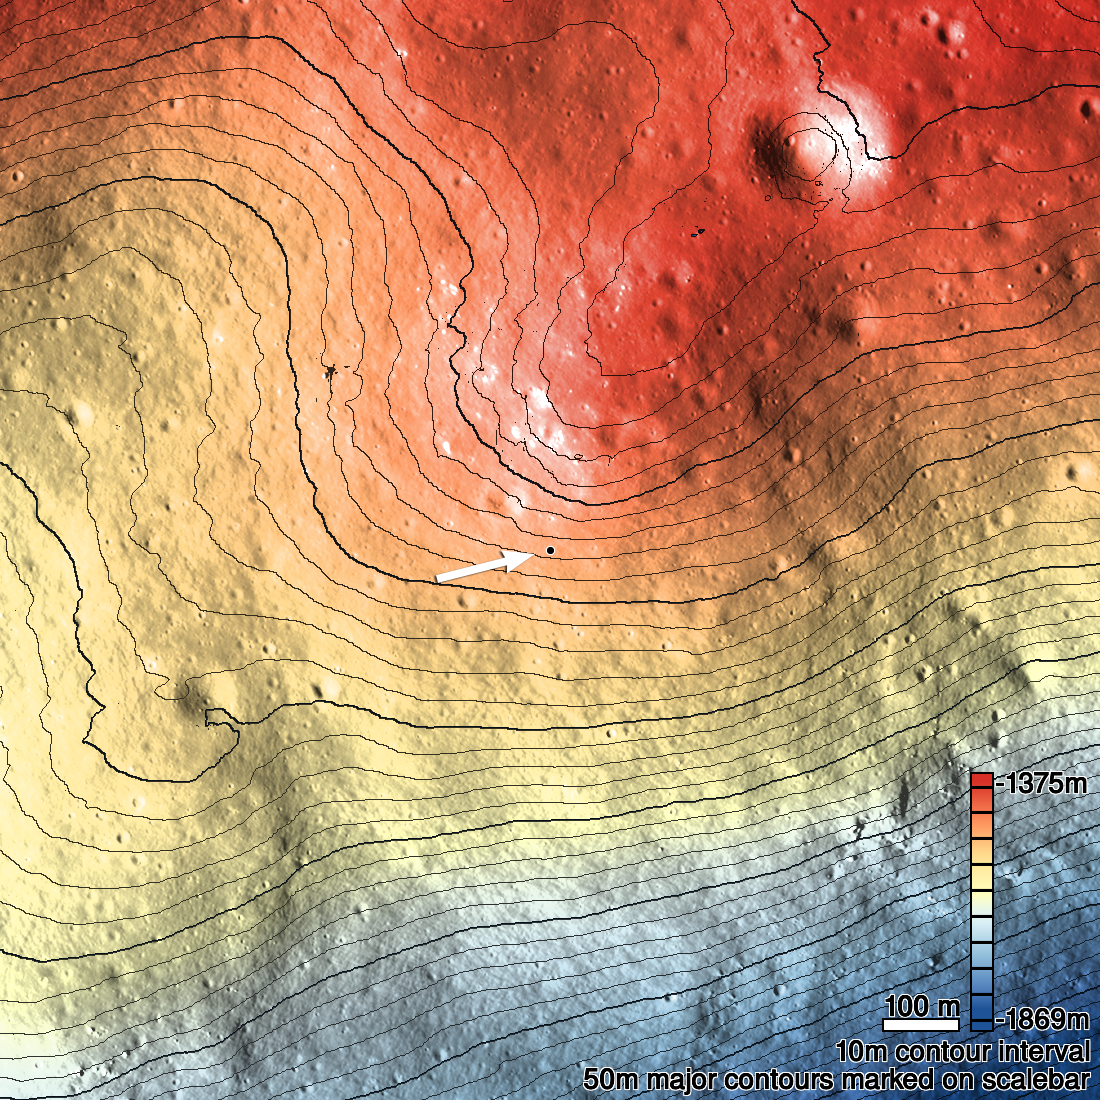 Topo map centered on new impact crater